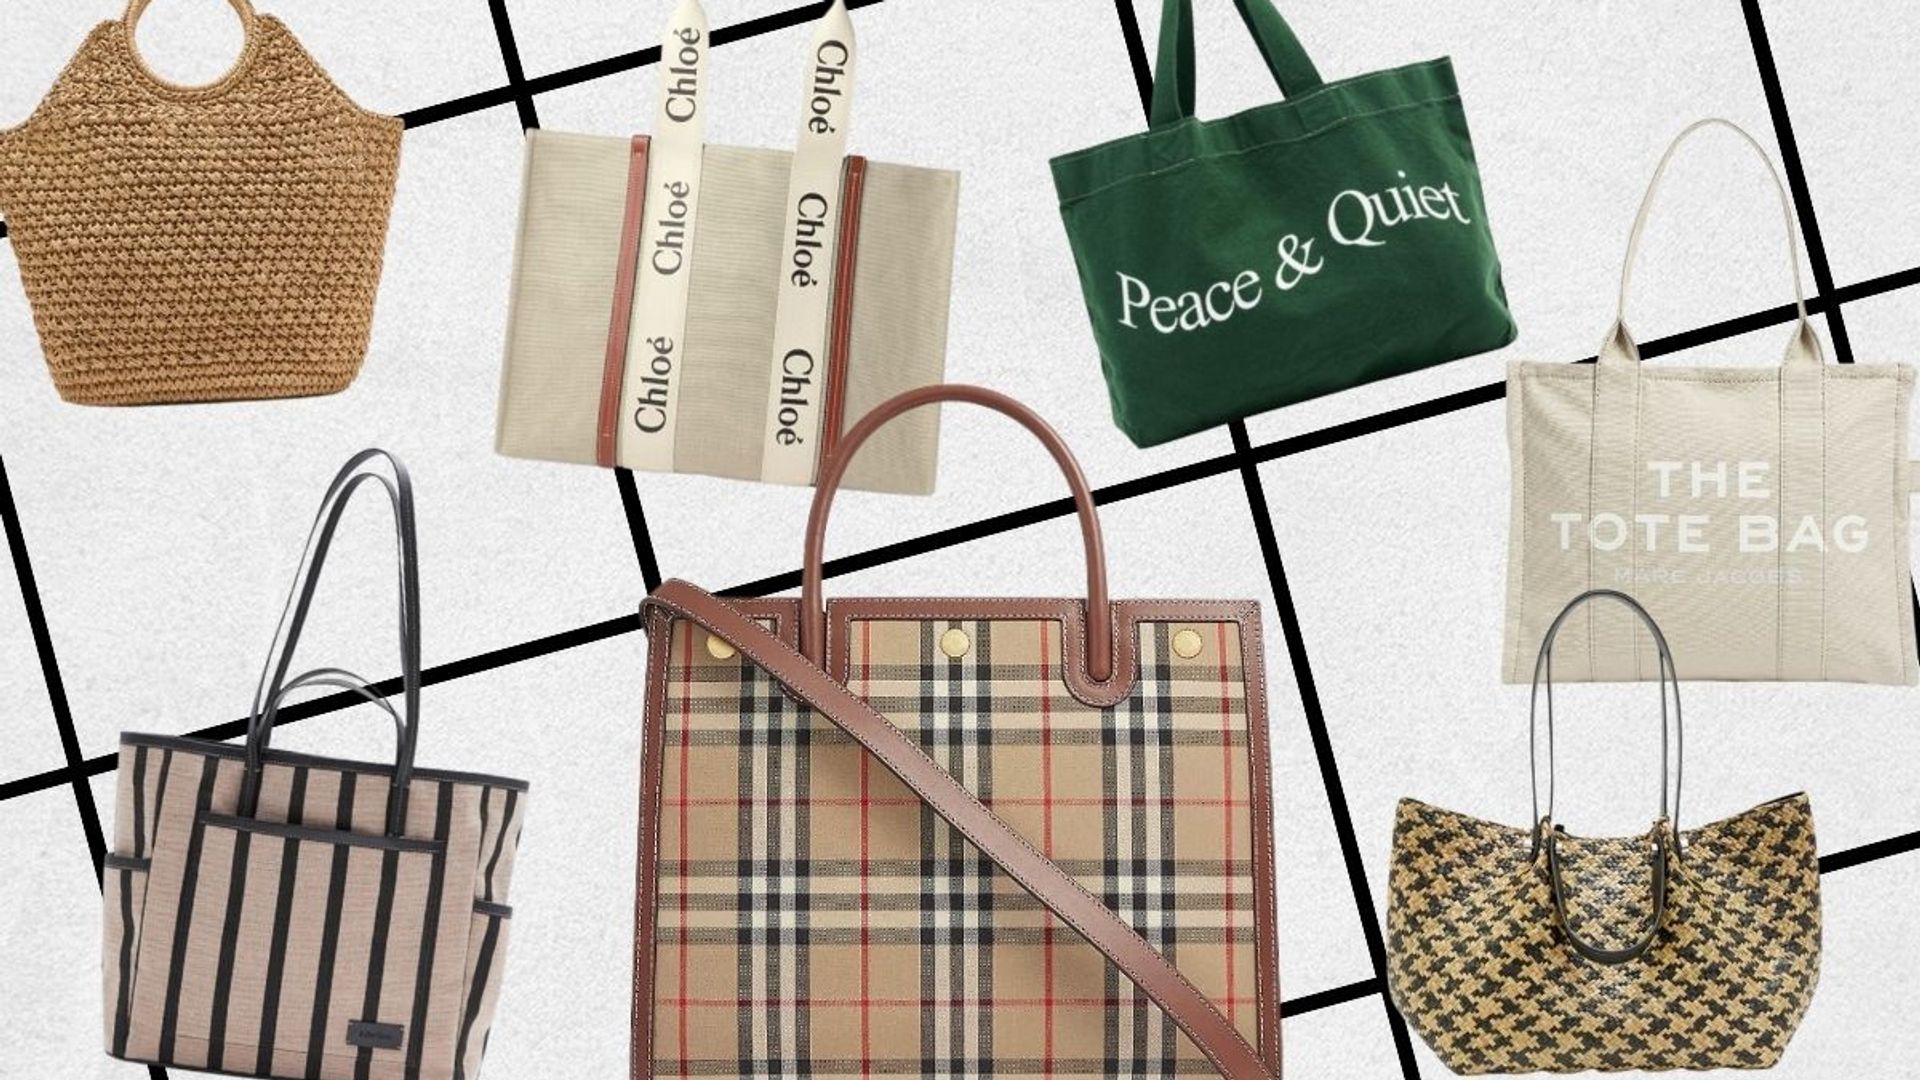 This Burberry tote bag is going viral: 7 'ludicrously capacious' bags to shop now